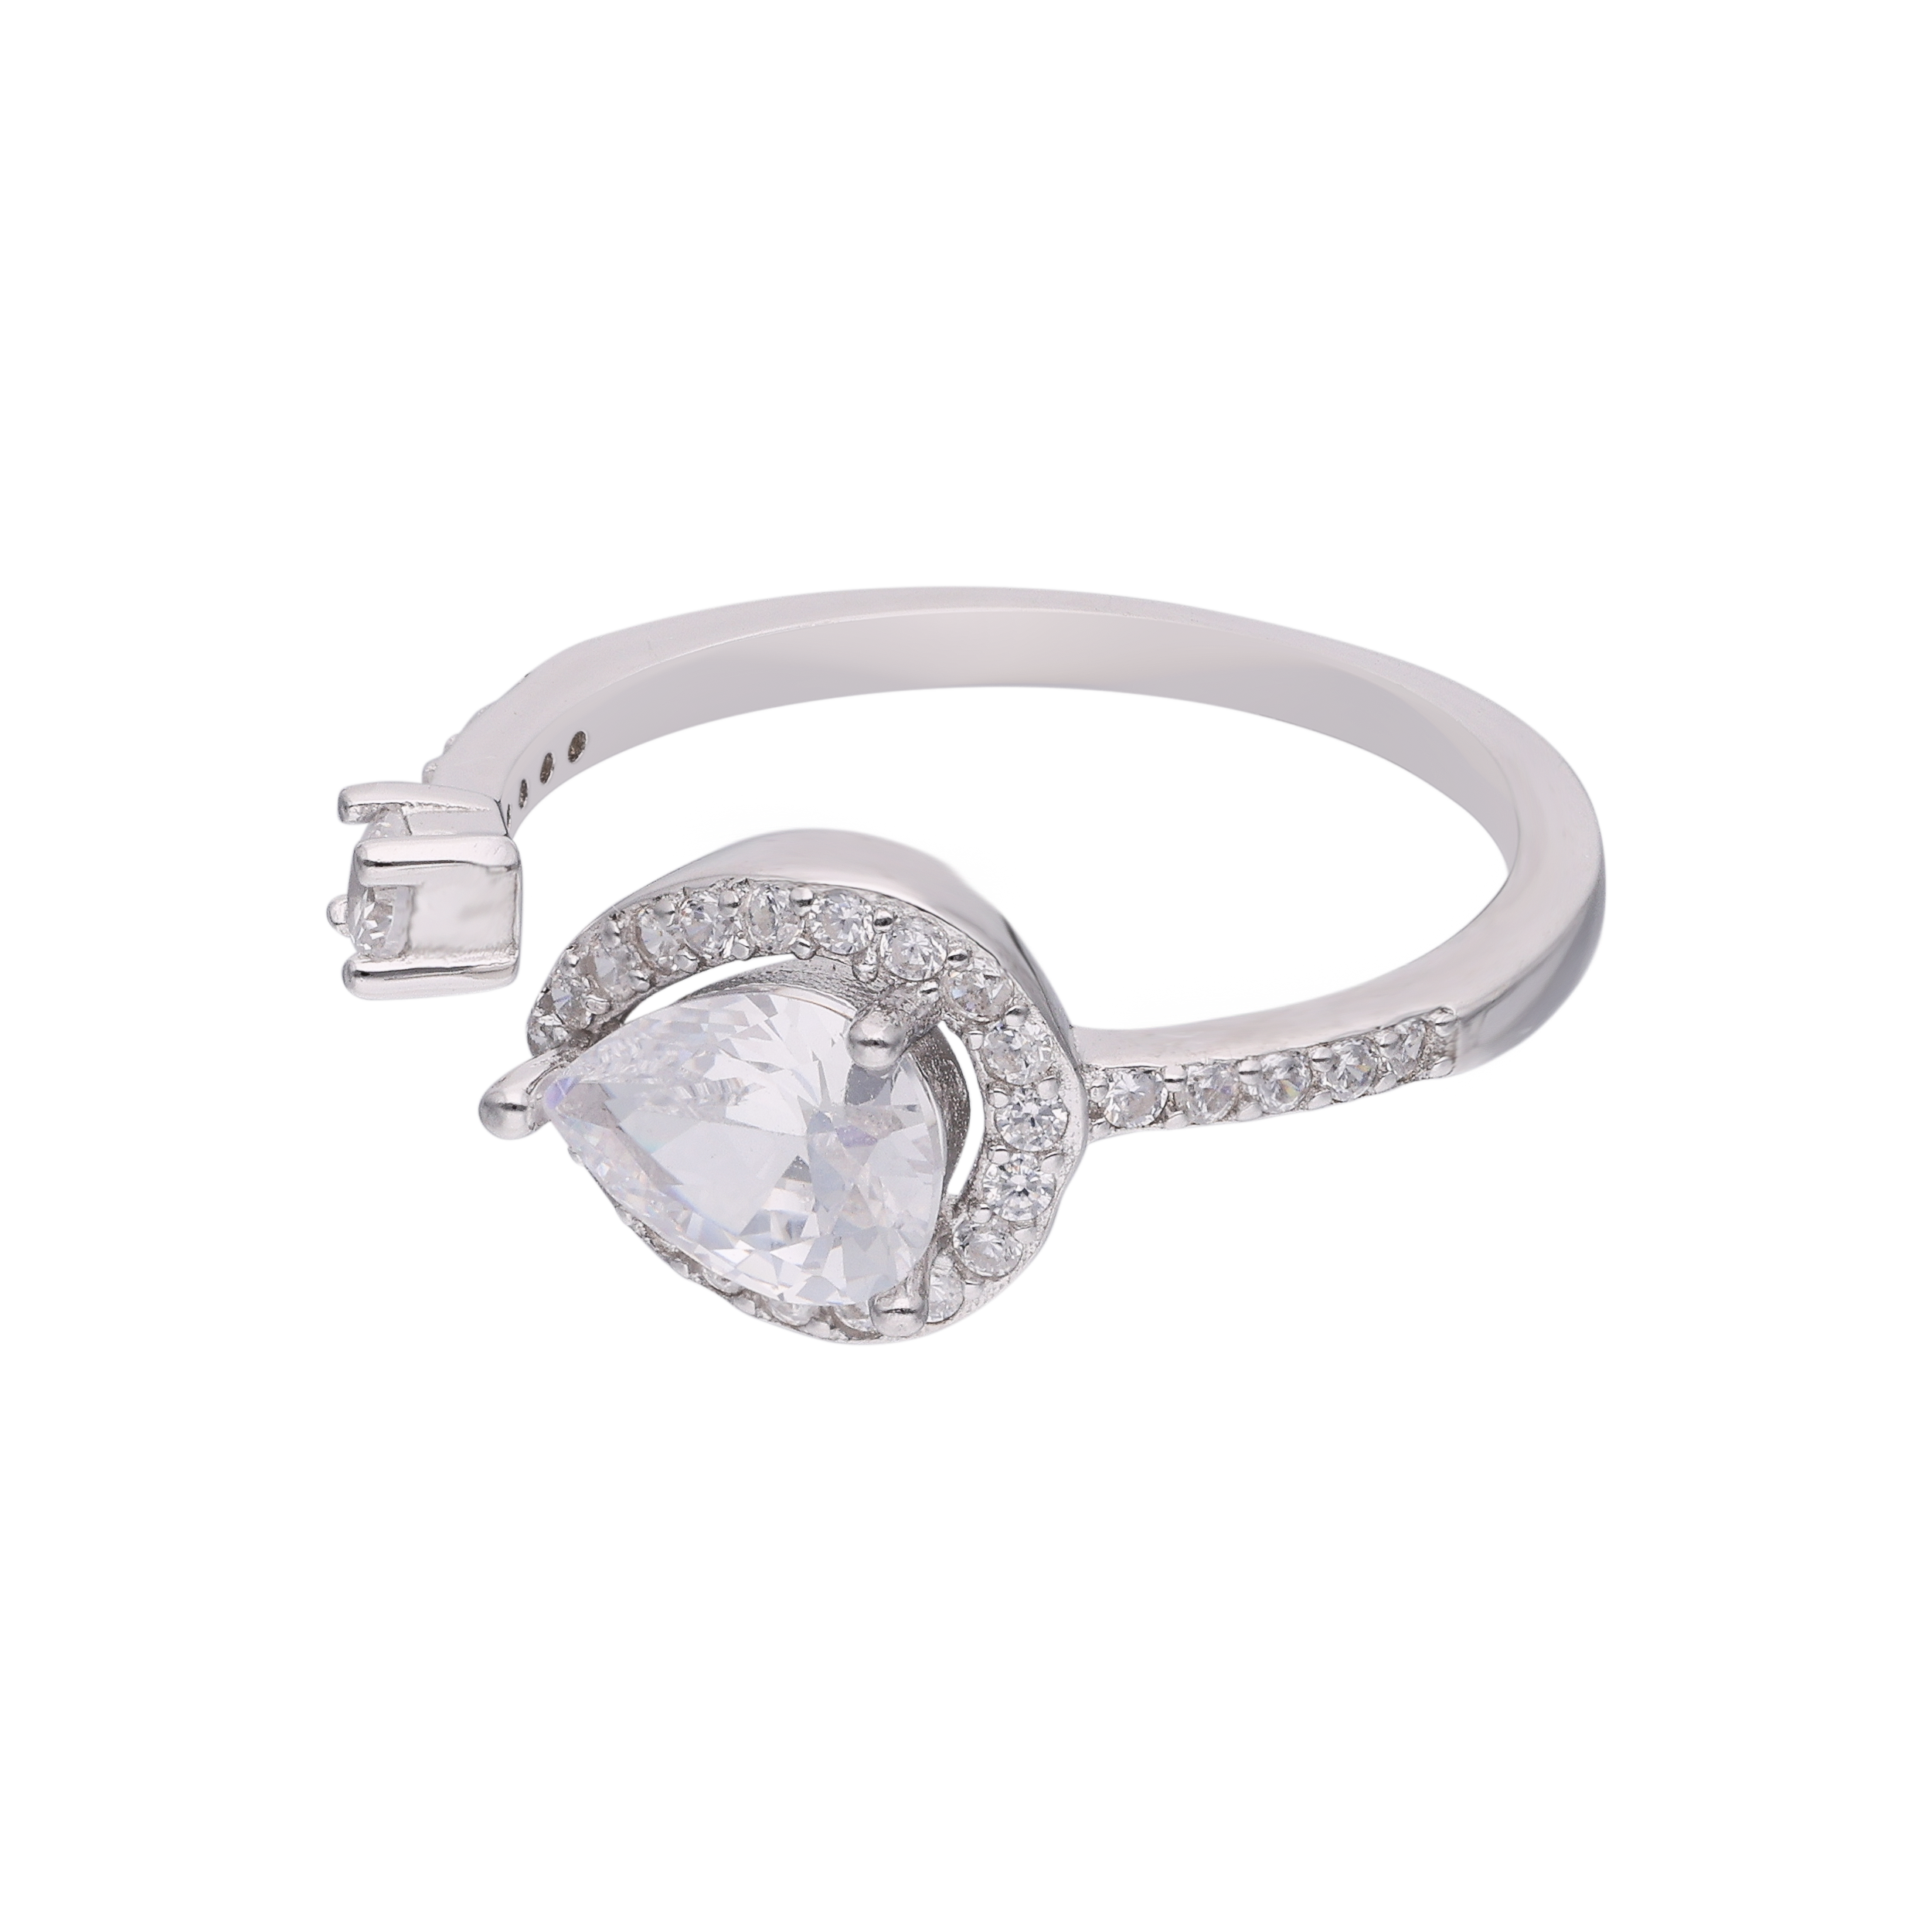 Dual Ends Silver Ring | SKU: 0002931098, 0002931418